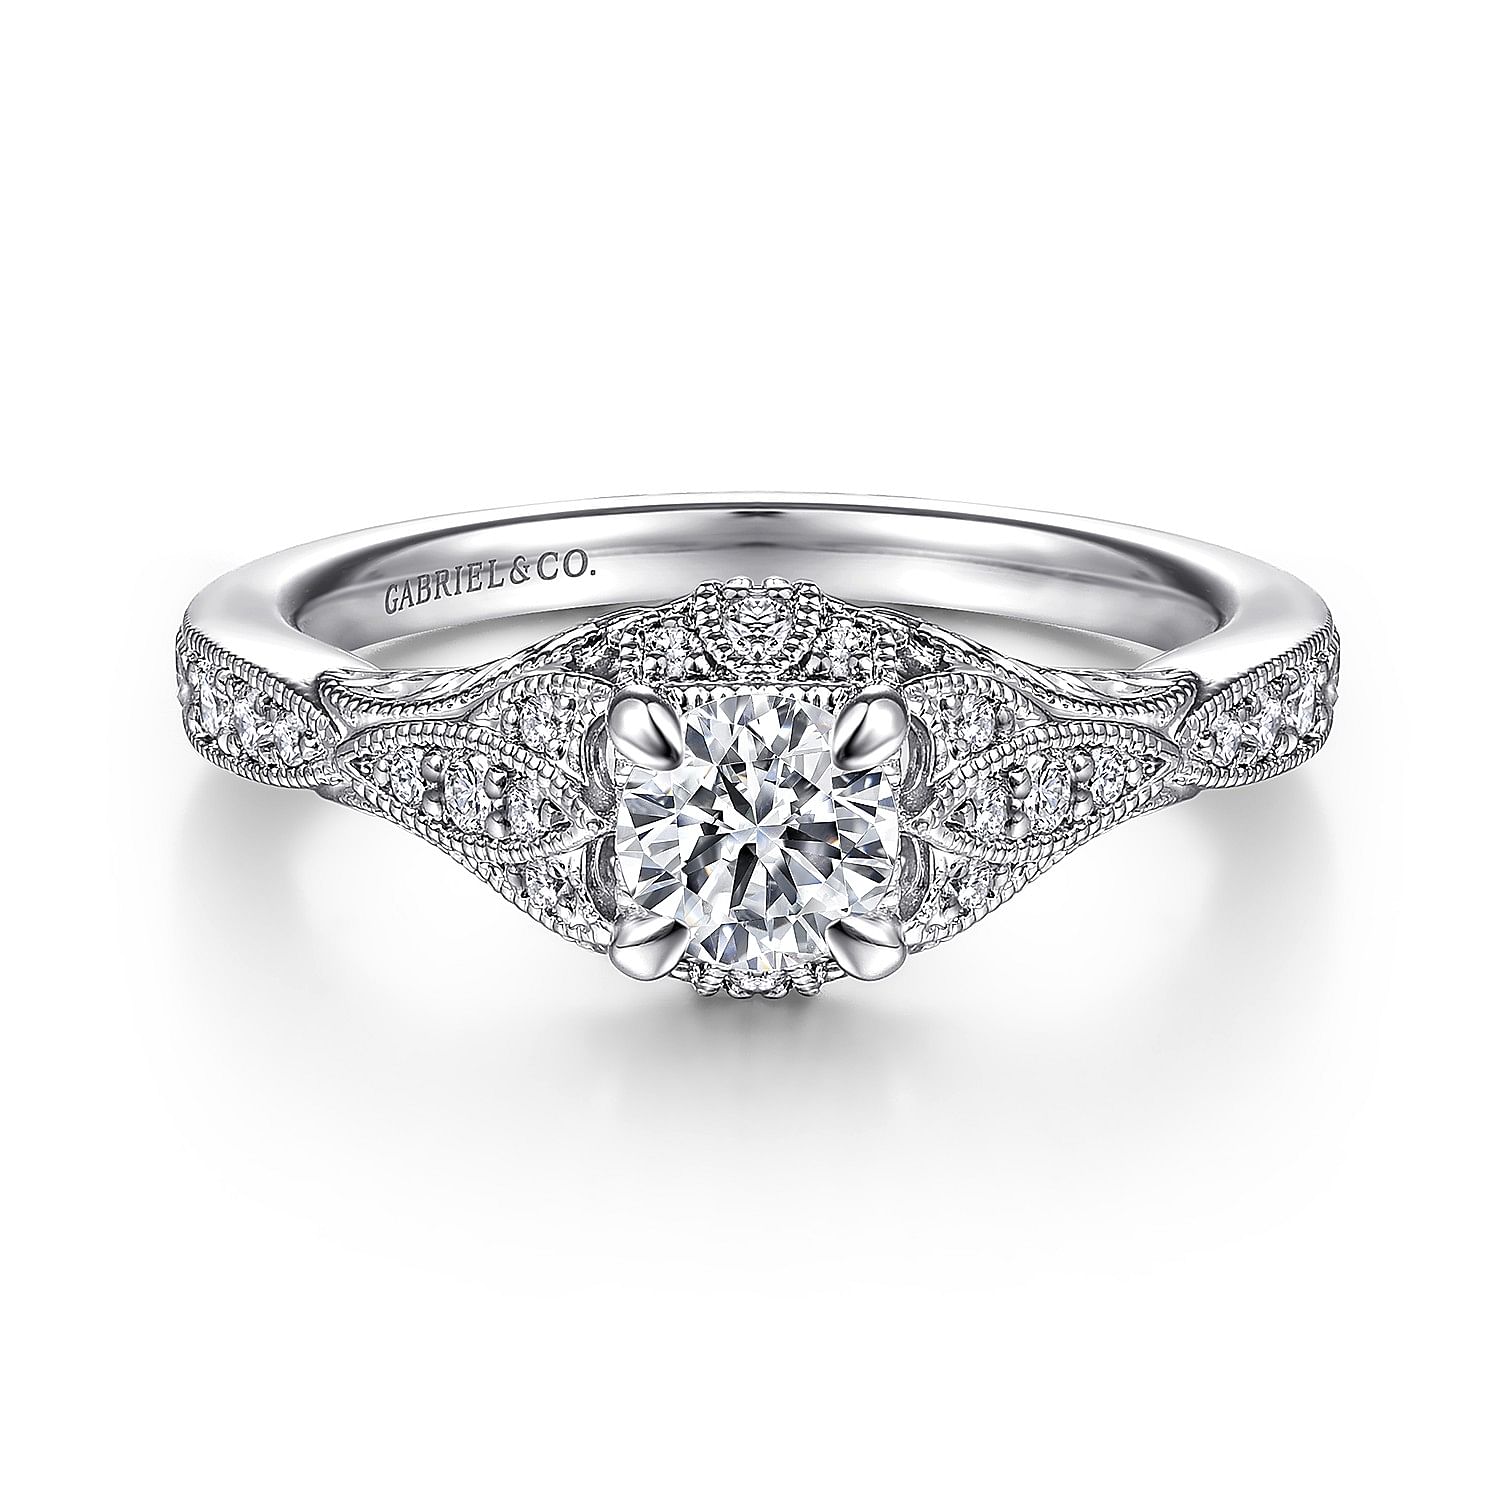 Iona - Vintage Inspired 14K White Gold Round Halo Complete Diamond Engagement Ring